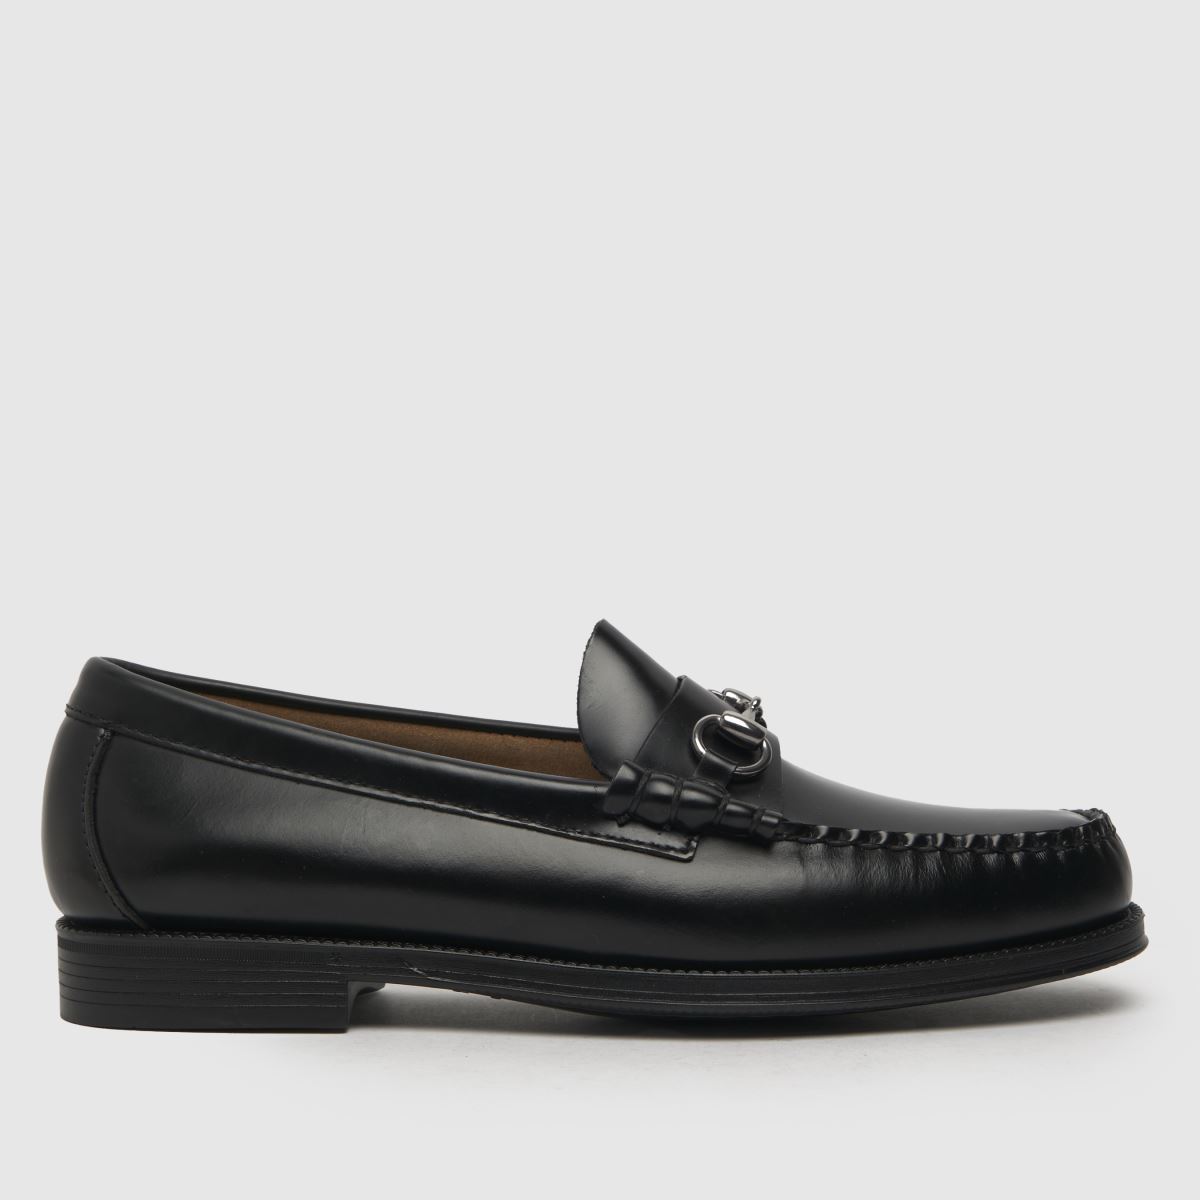 G.H. BASS easy weejuns lincoln loafer shoes in black